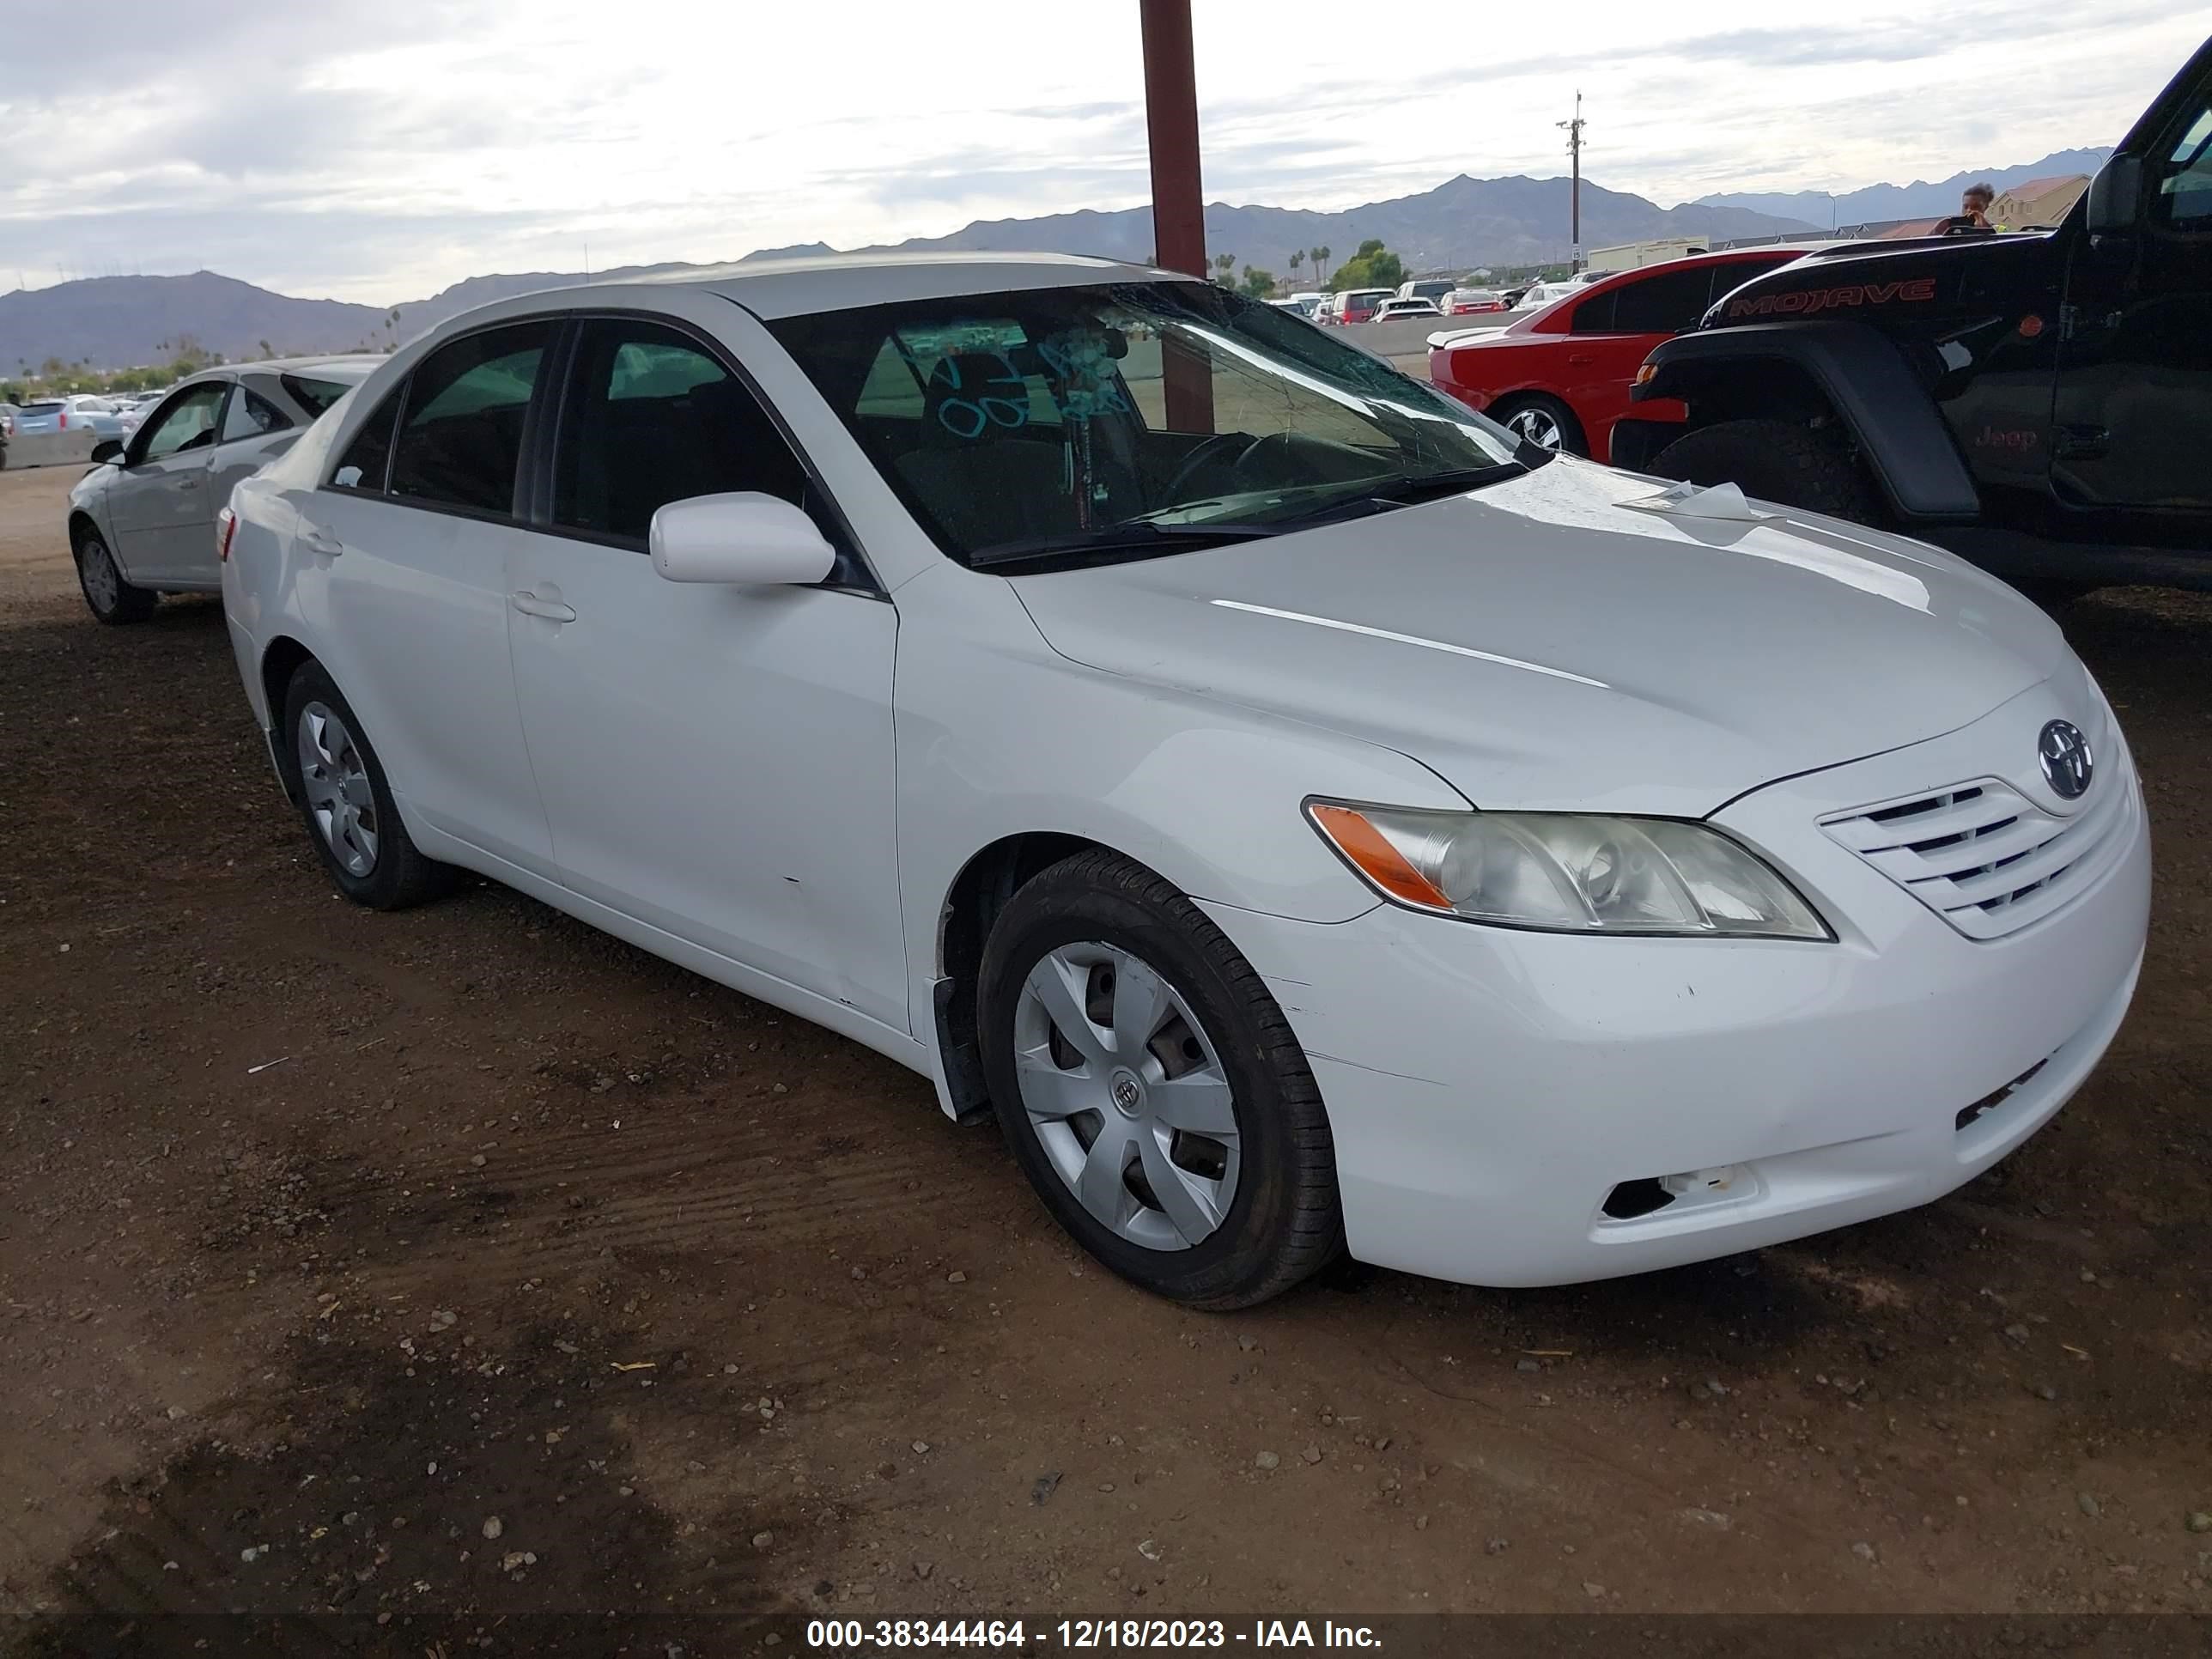 VIN: 4T4BE46K07R005620 - toyota camry